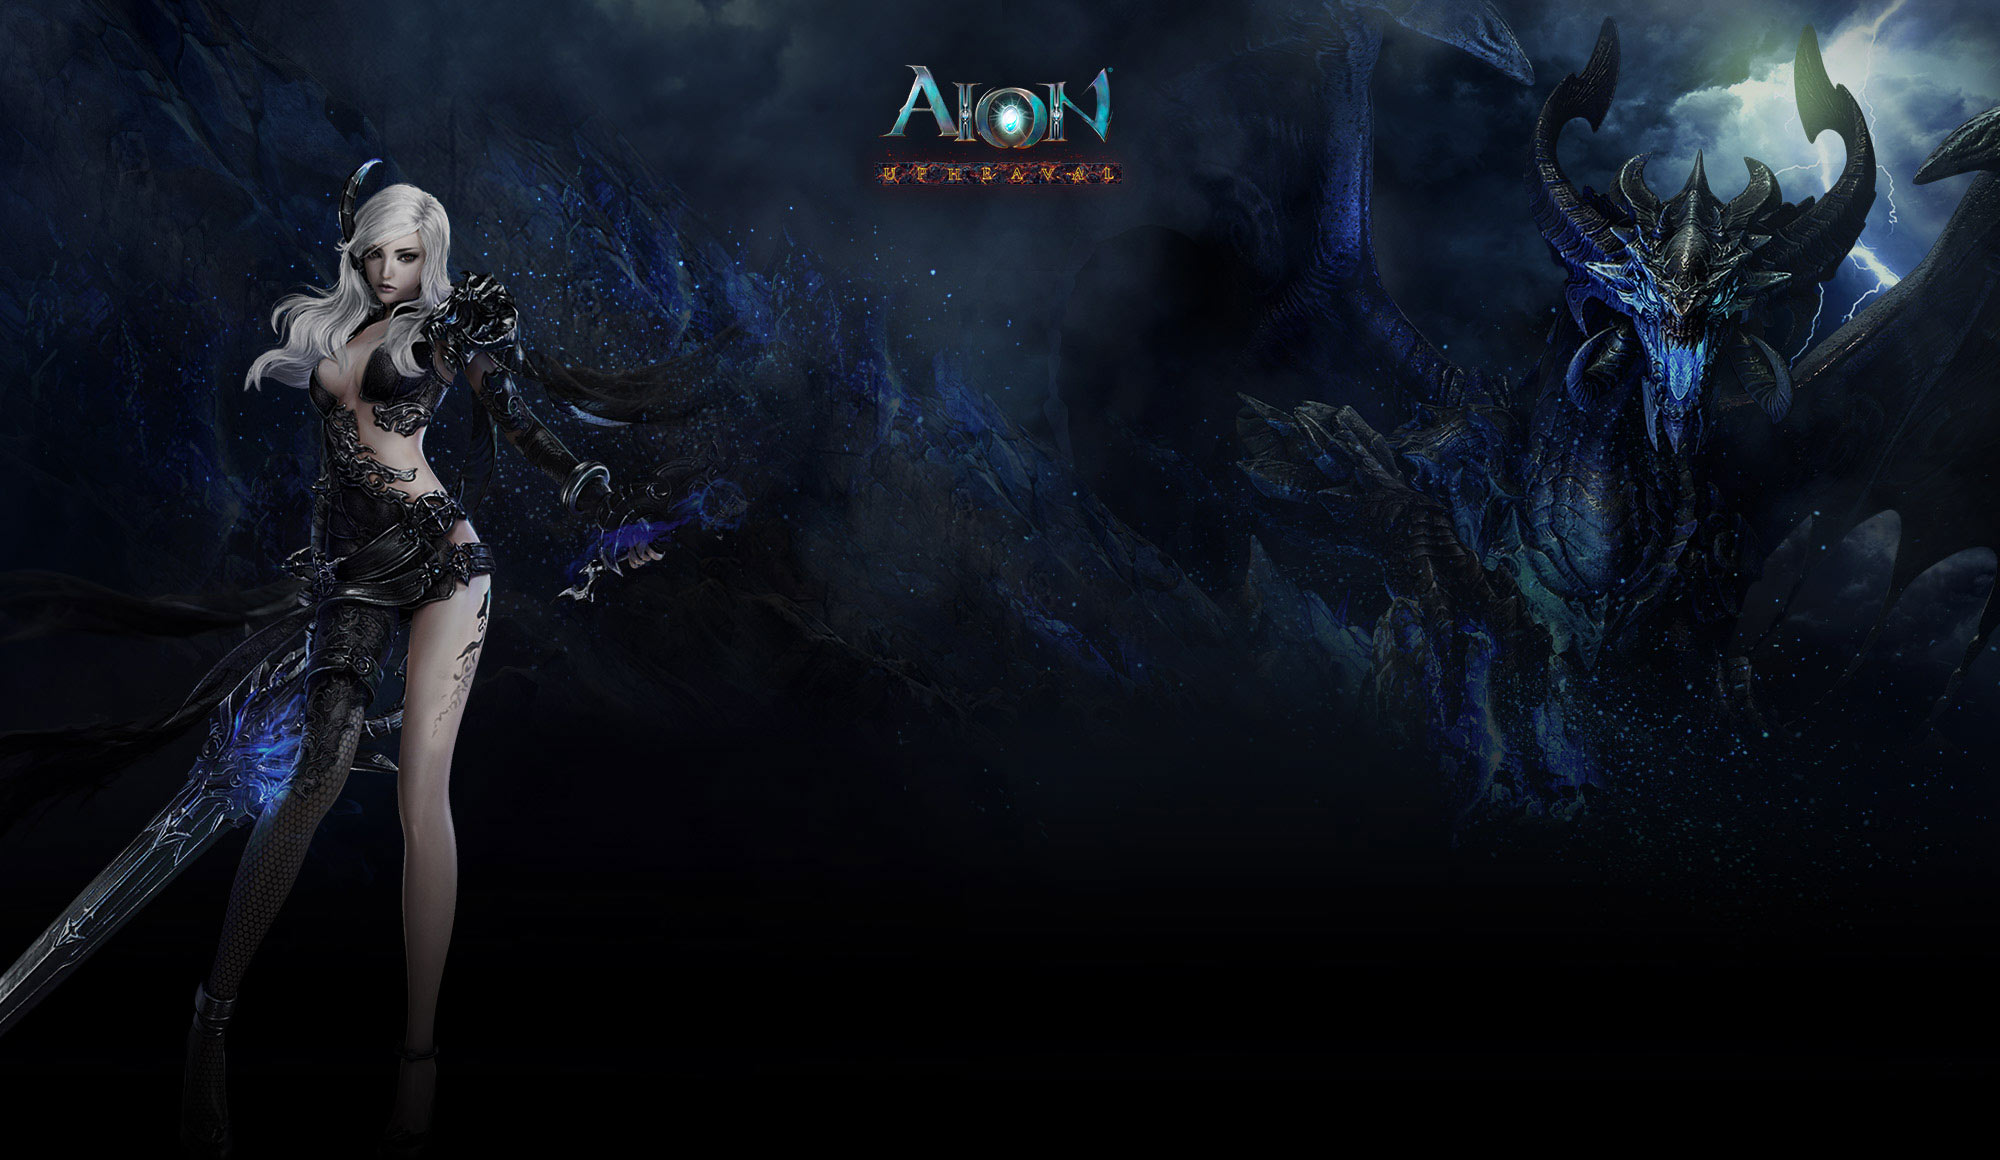 Image Wiki Background Aion Powered By Wikia